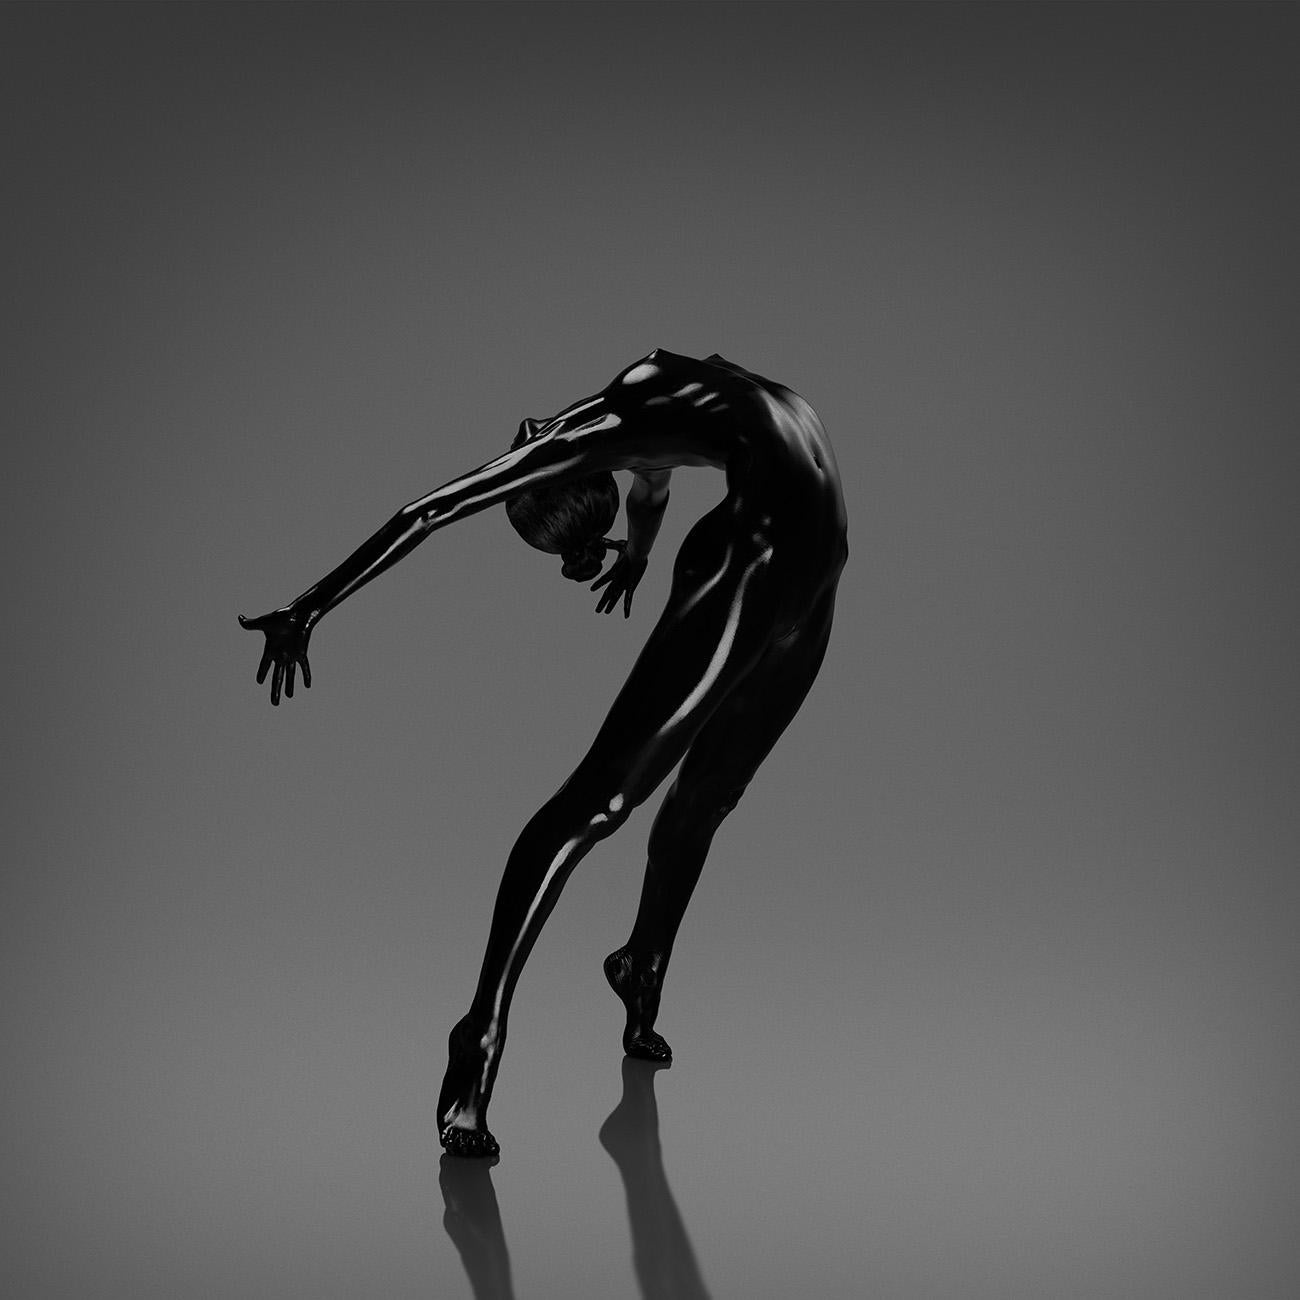 No title (No 5) Photography Edition 1/25 32x32 inch by Yevgeniy Repiashenko

Year photo was taken: 2016

This picture is a part of Spirit series.
The picture shows the frozen movement of the dancer. 
Black body make-up is put on the dancer's